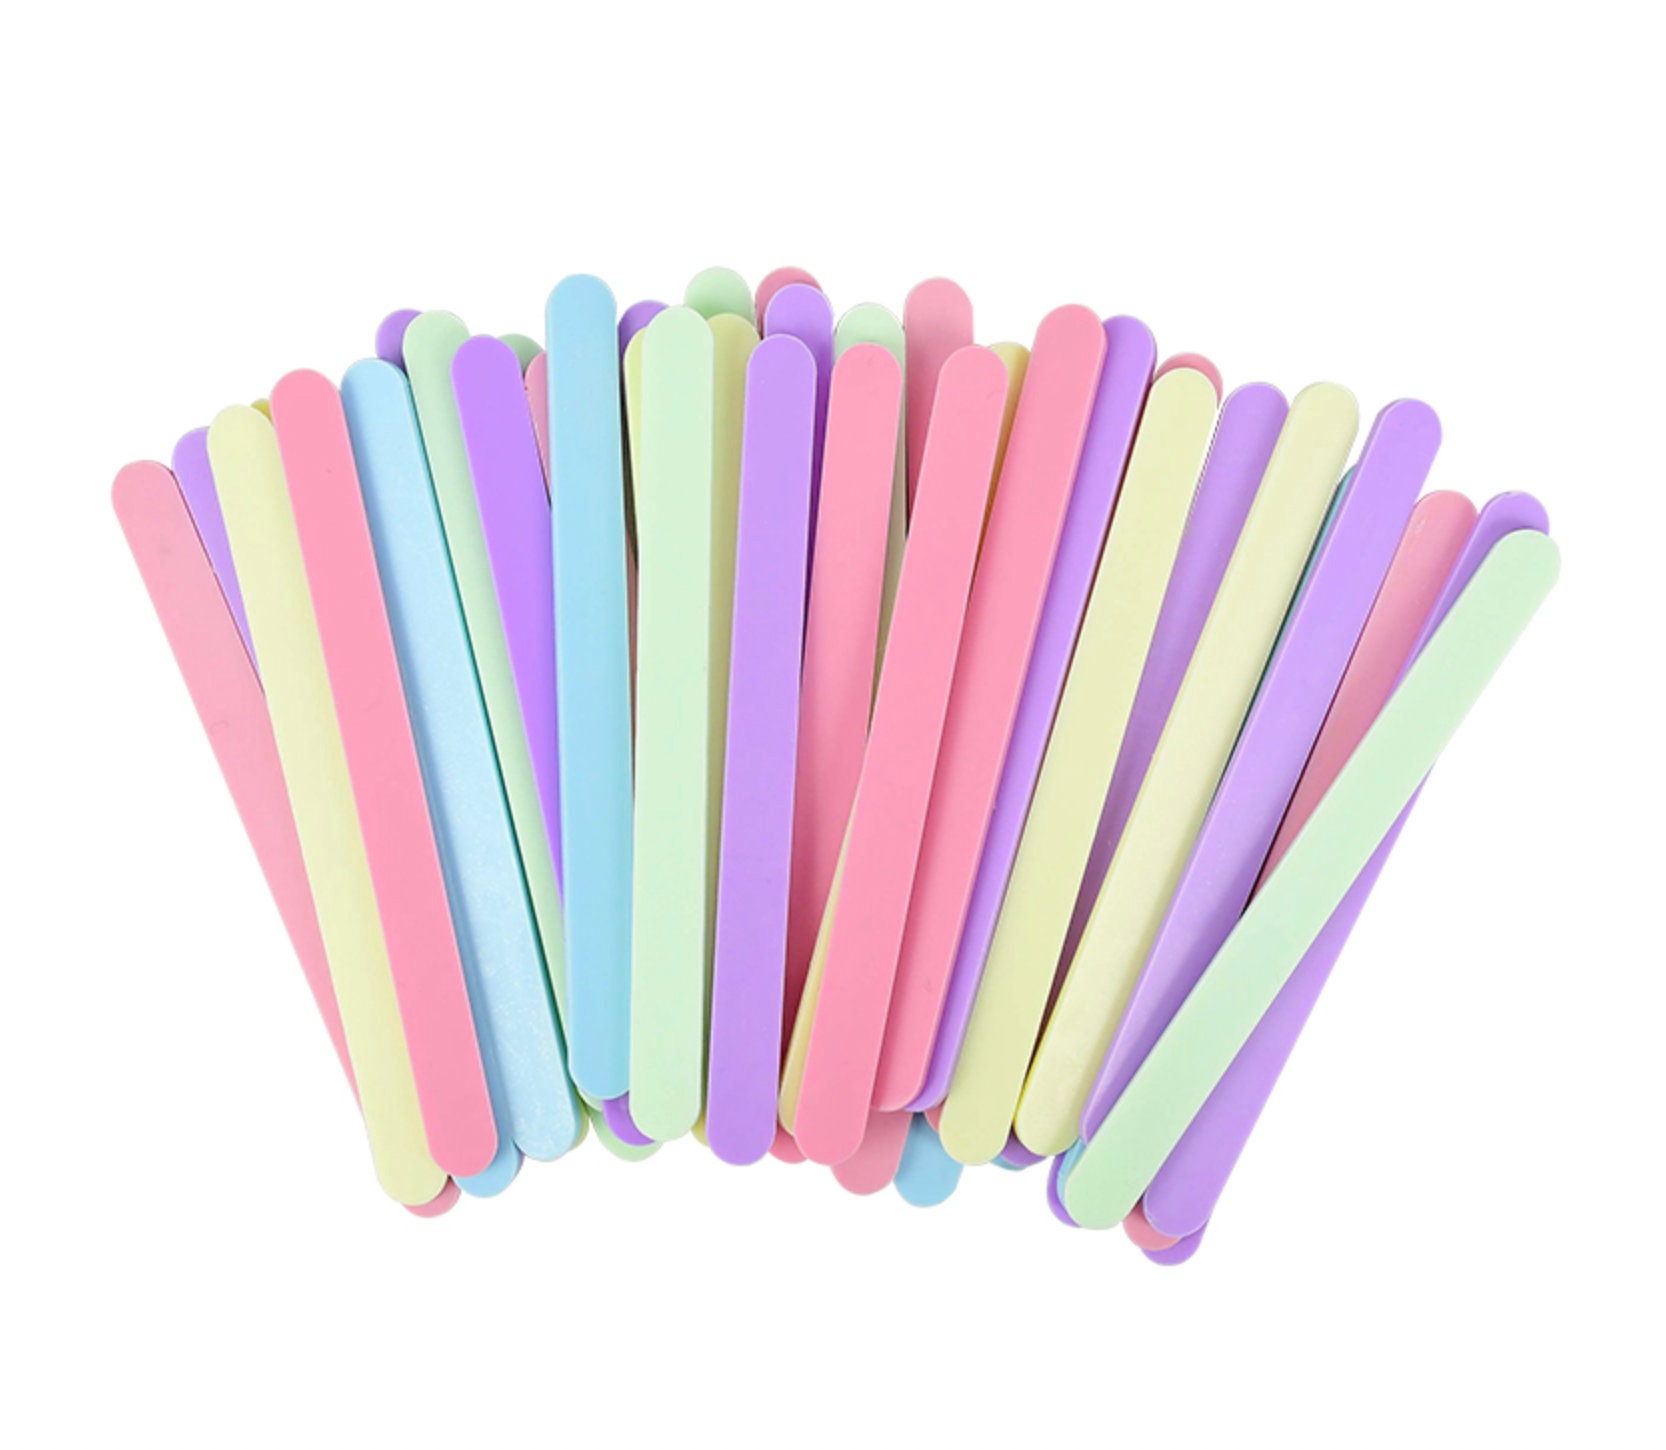 Incraftables Colored Popsicle Sticks for Crafts 600pcs (7 Colors